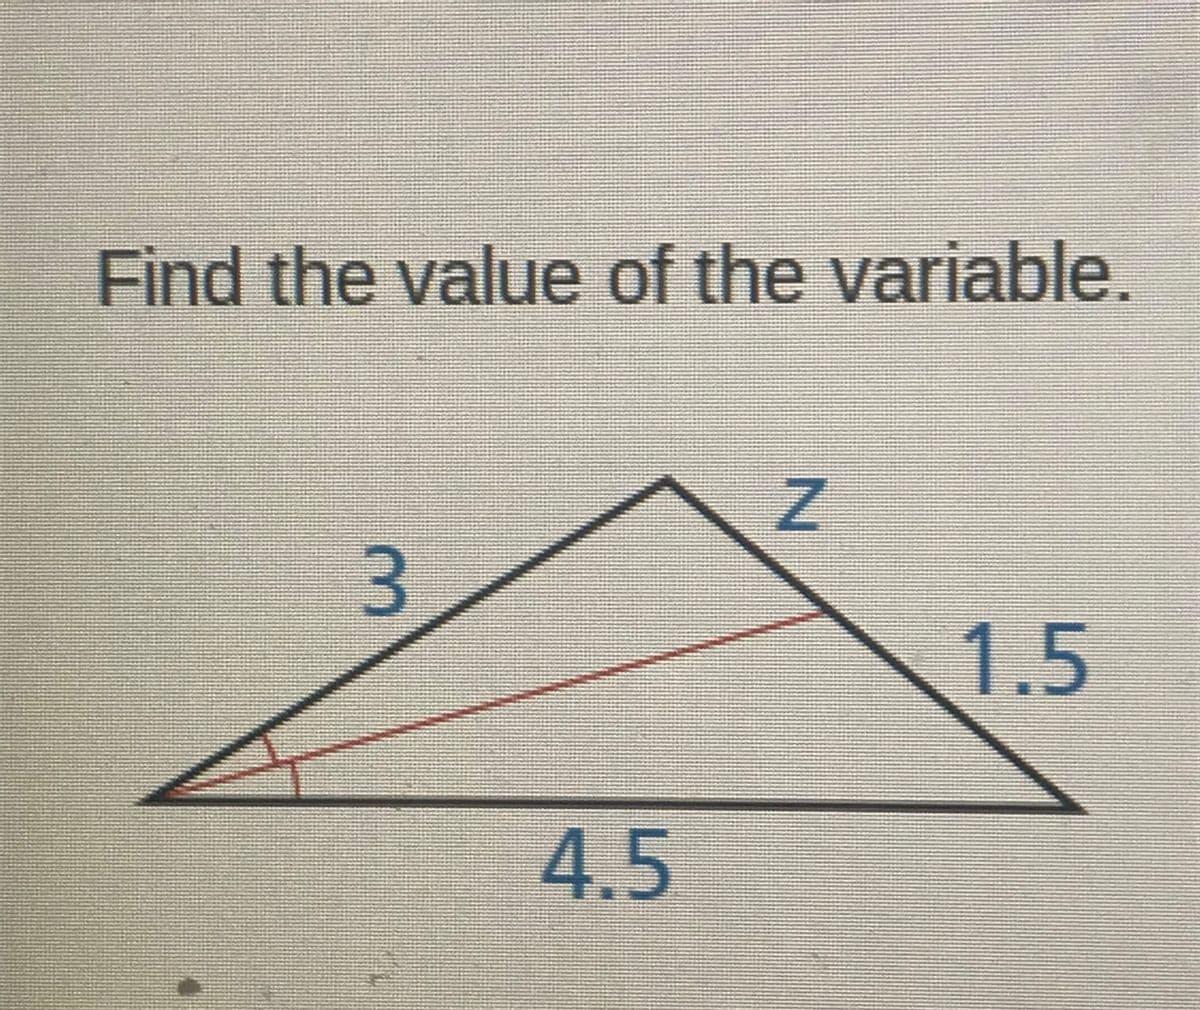 Find the value of the variable.
3.
1.5
4.5
